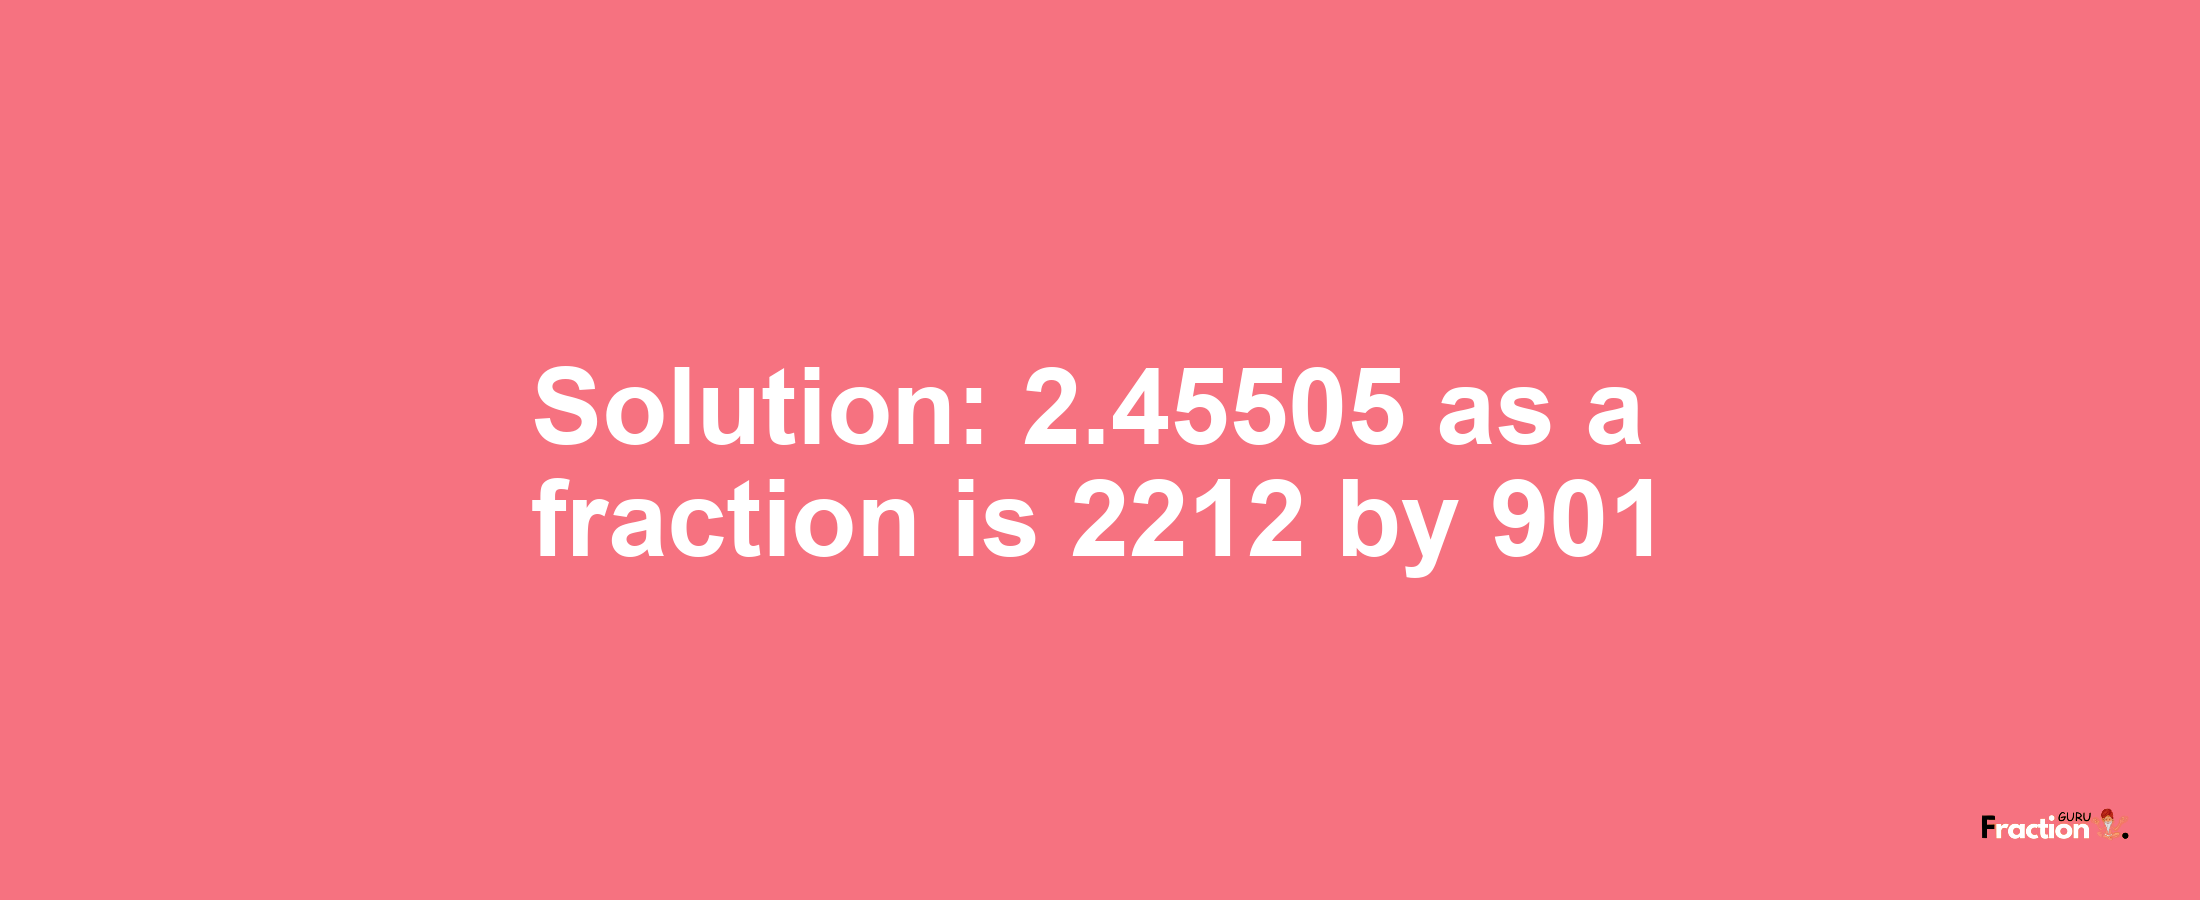 Solution:2.45505 as a fraction is 2212/901